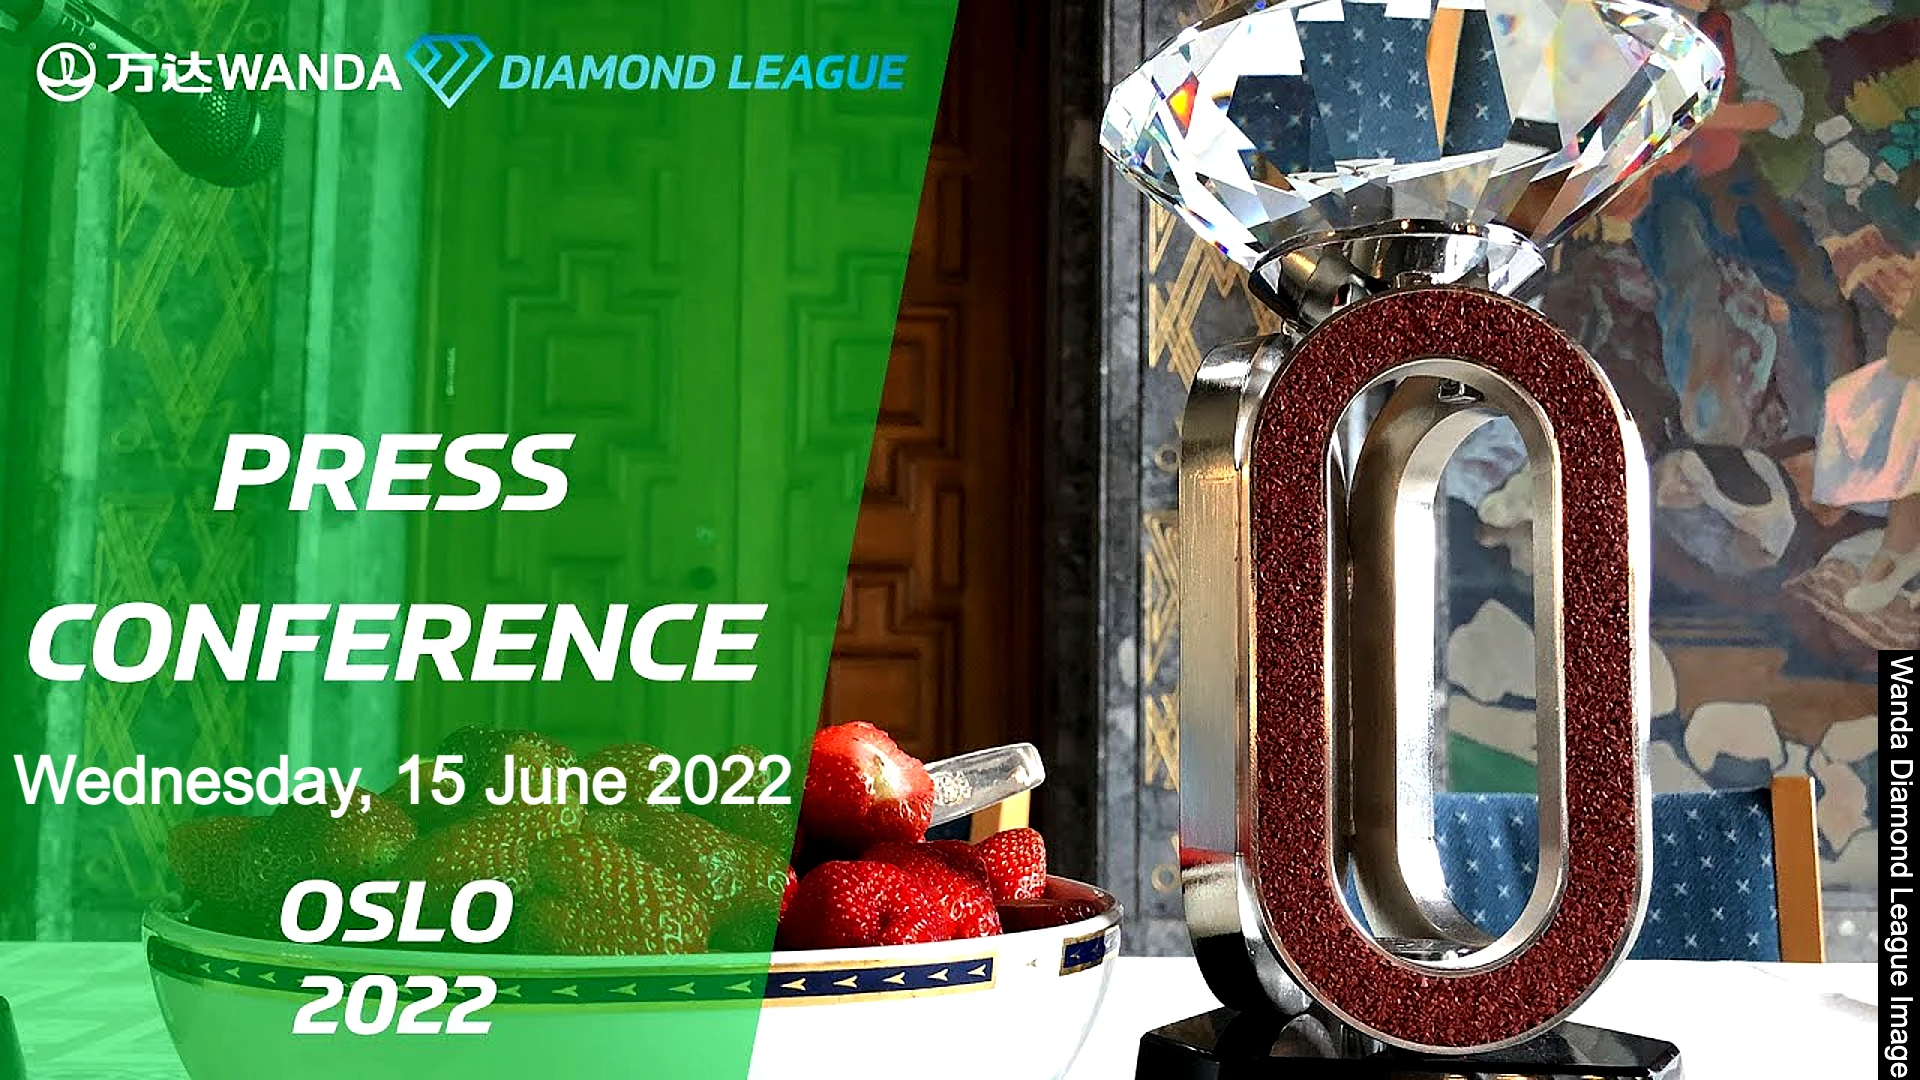 How to watch the 2022 Oslo Diamond League press conference?